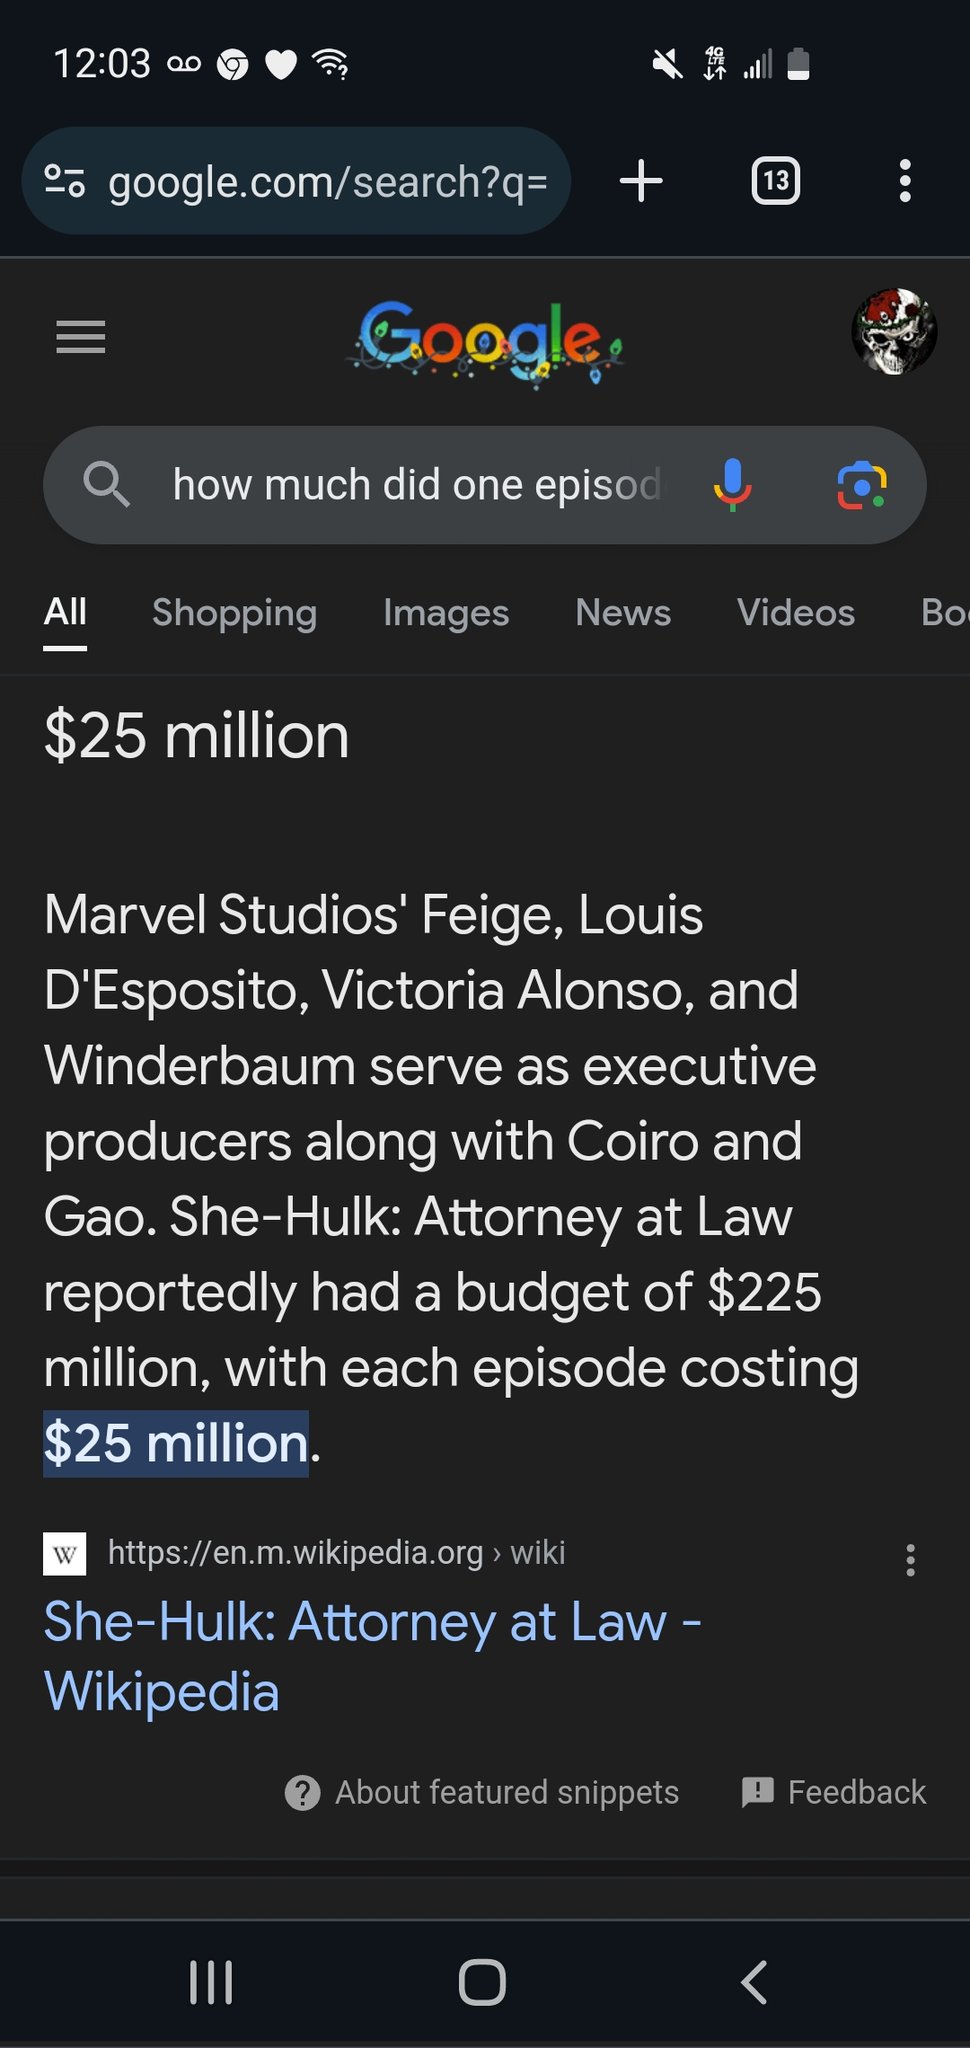 The Marvels' Budget: How Much Money Did It Cost To Make?